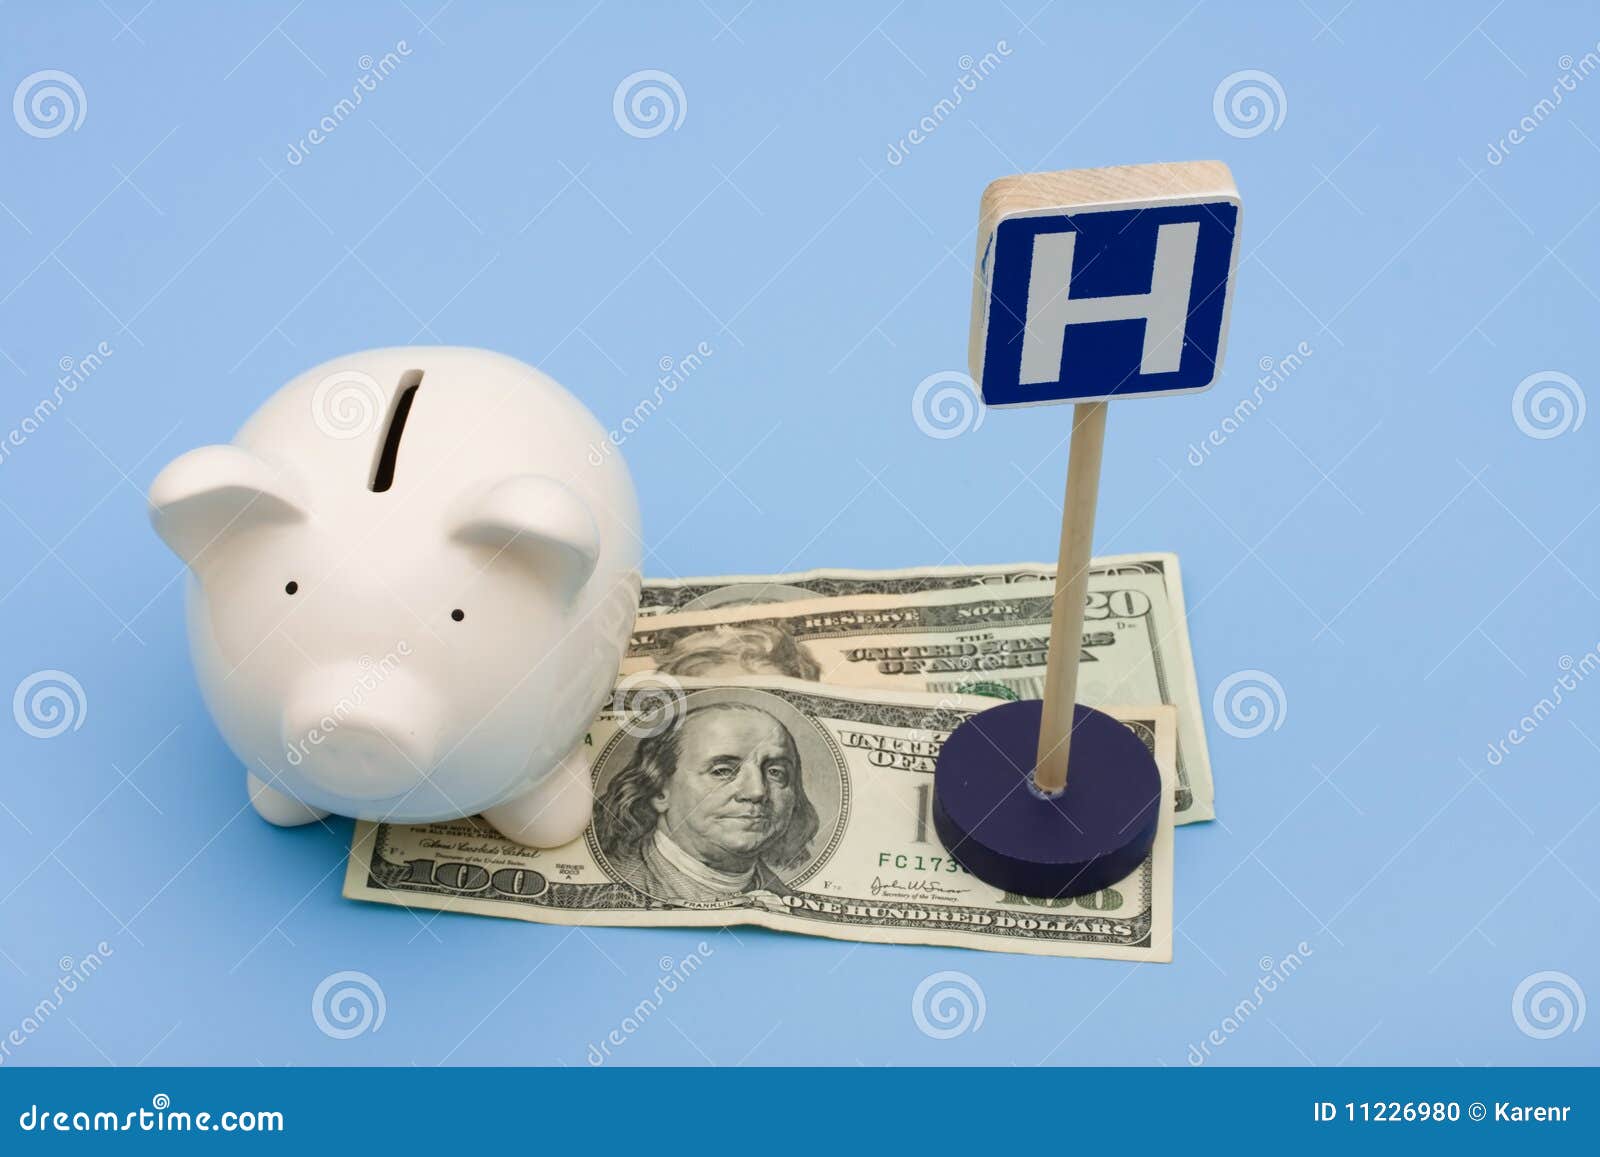 healthcare costs